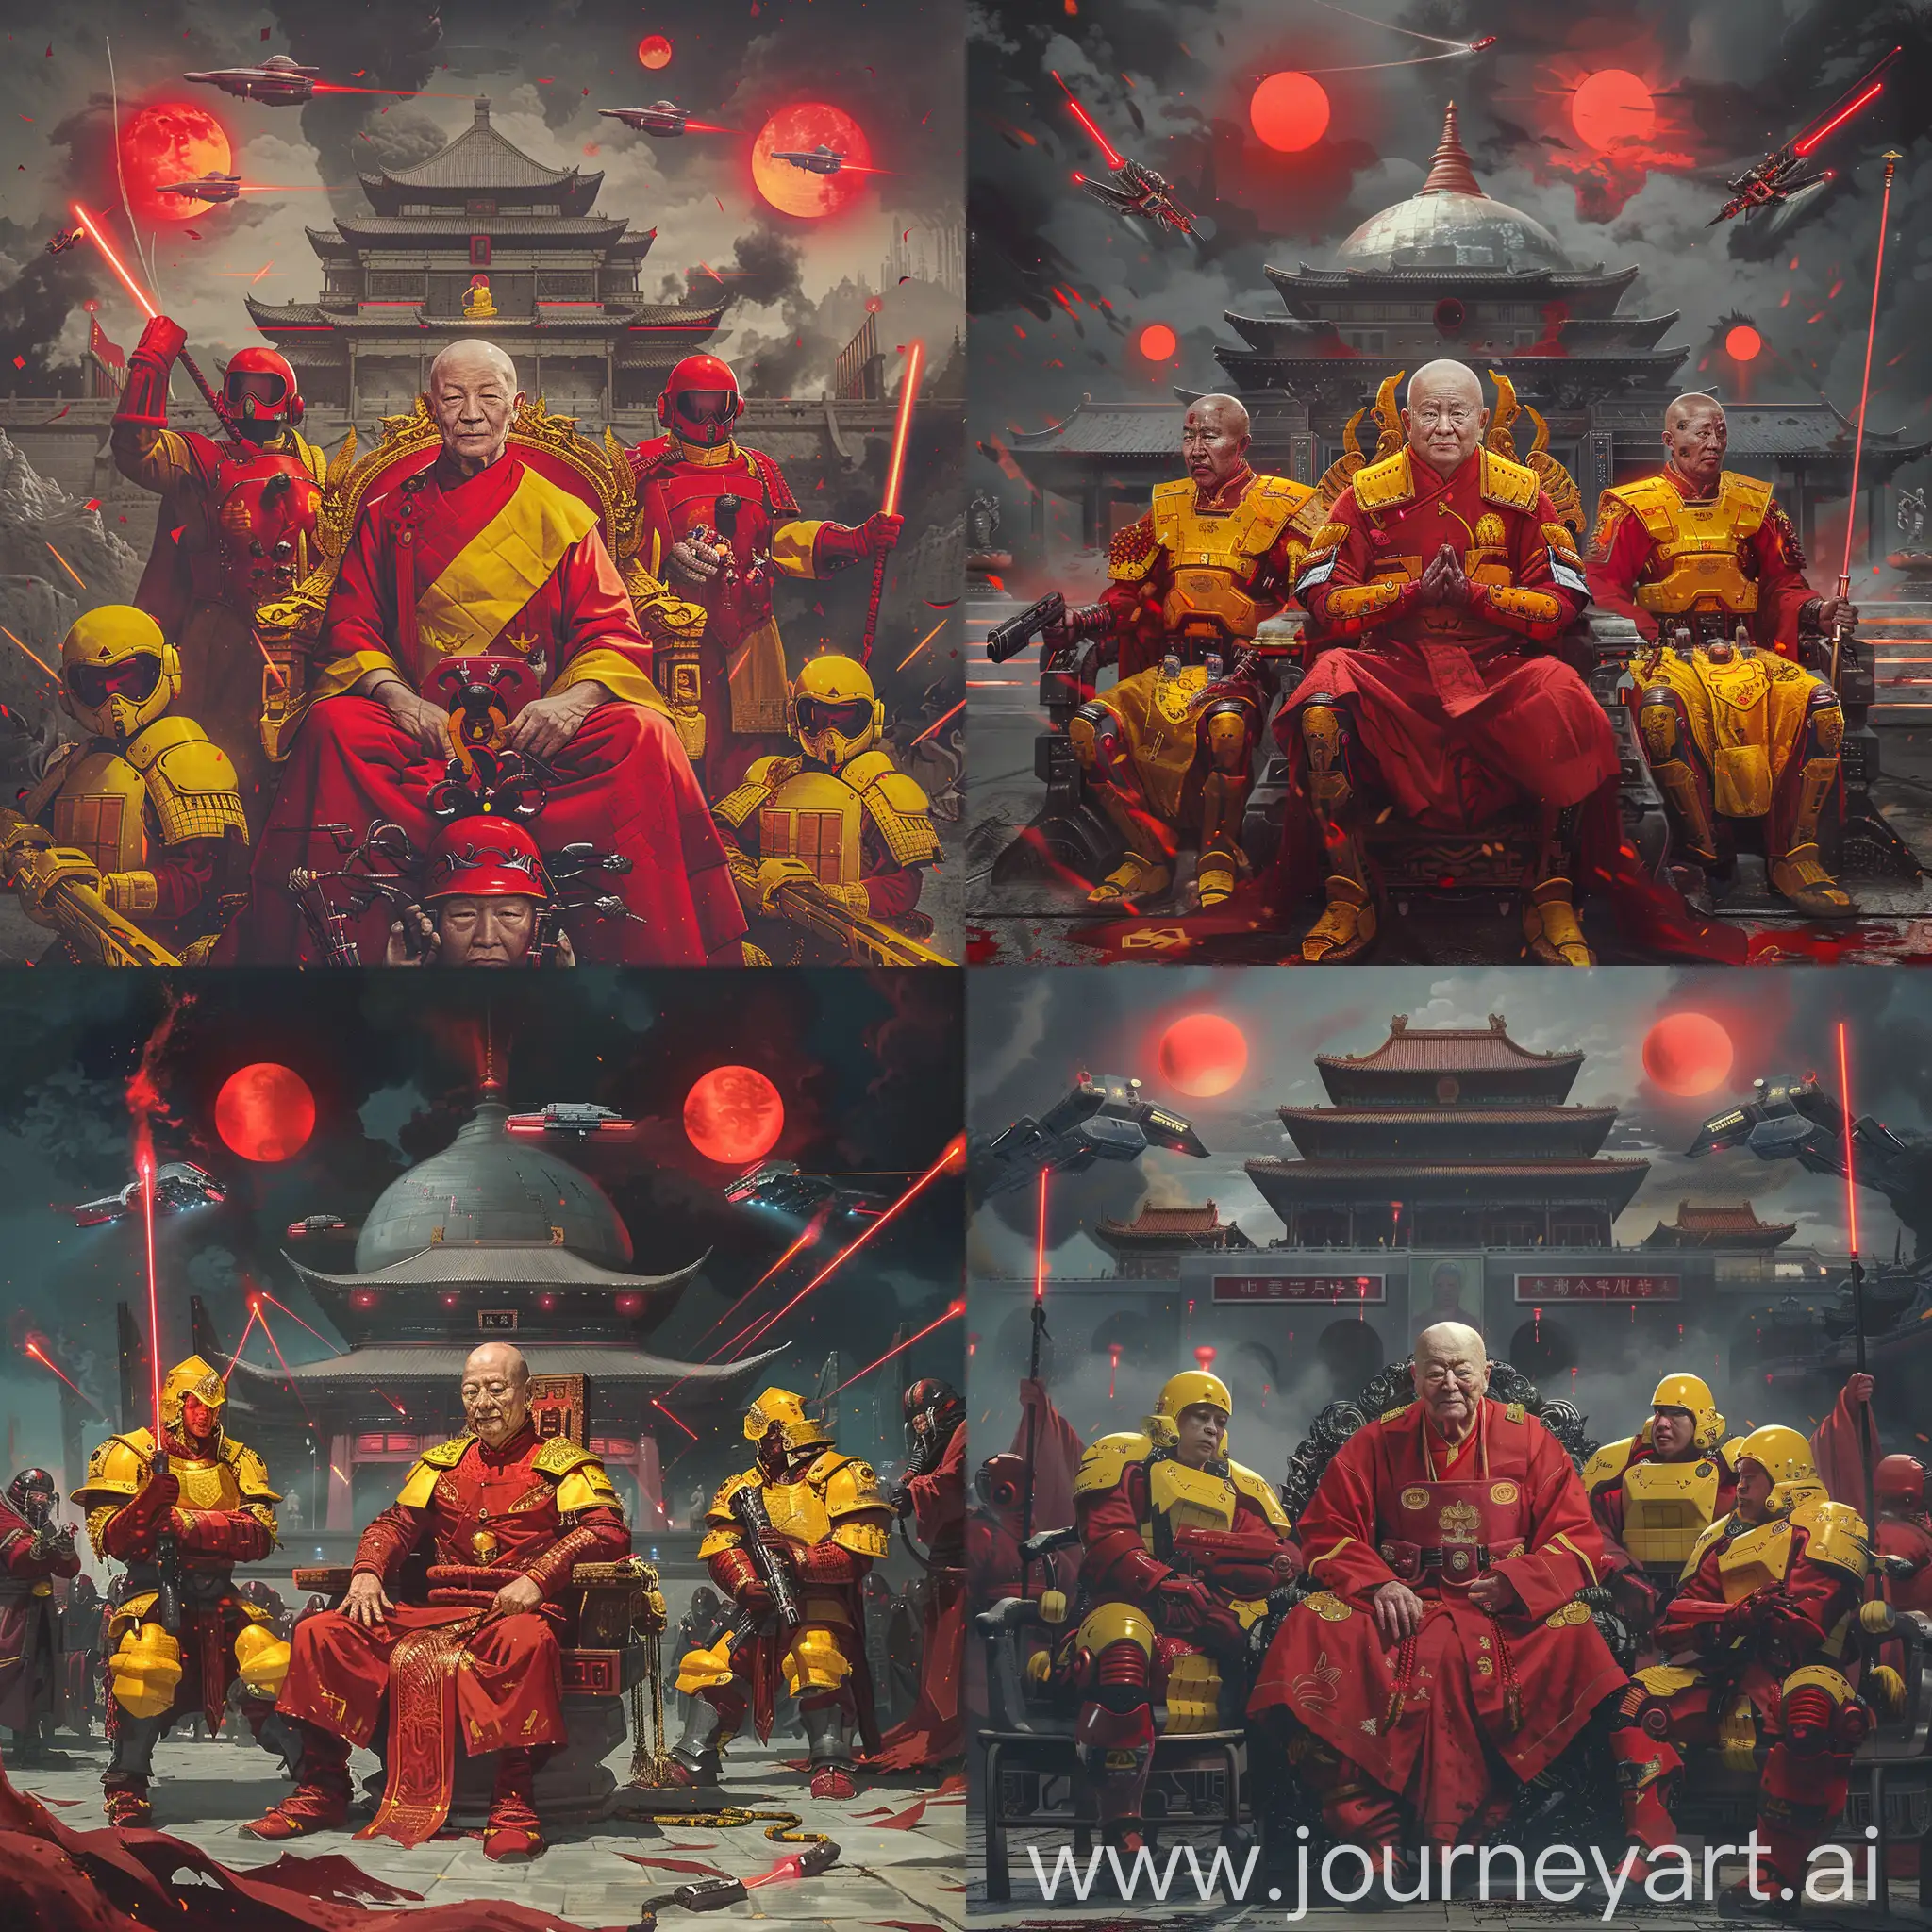 Chinese-Buddhist-Monk-Senior-on-Lotus-Throne-Surrounded-by-Cyborg-Soldiers-and-Futuristic-Temple